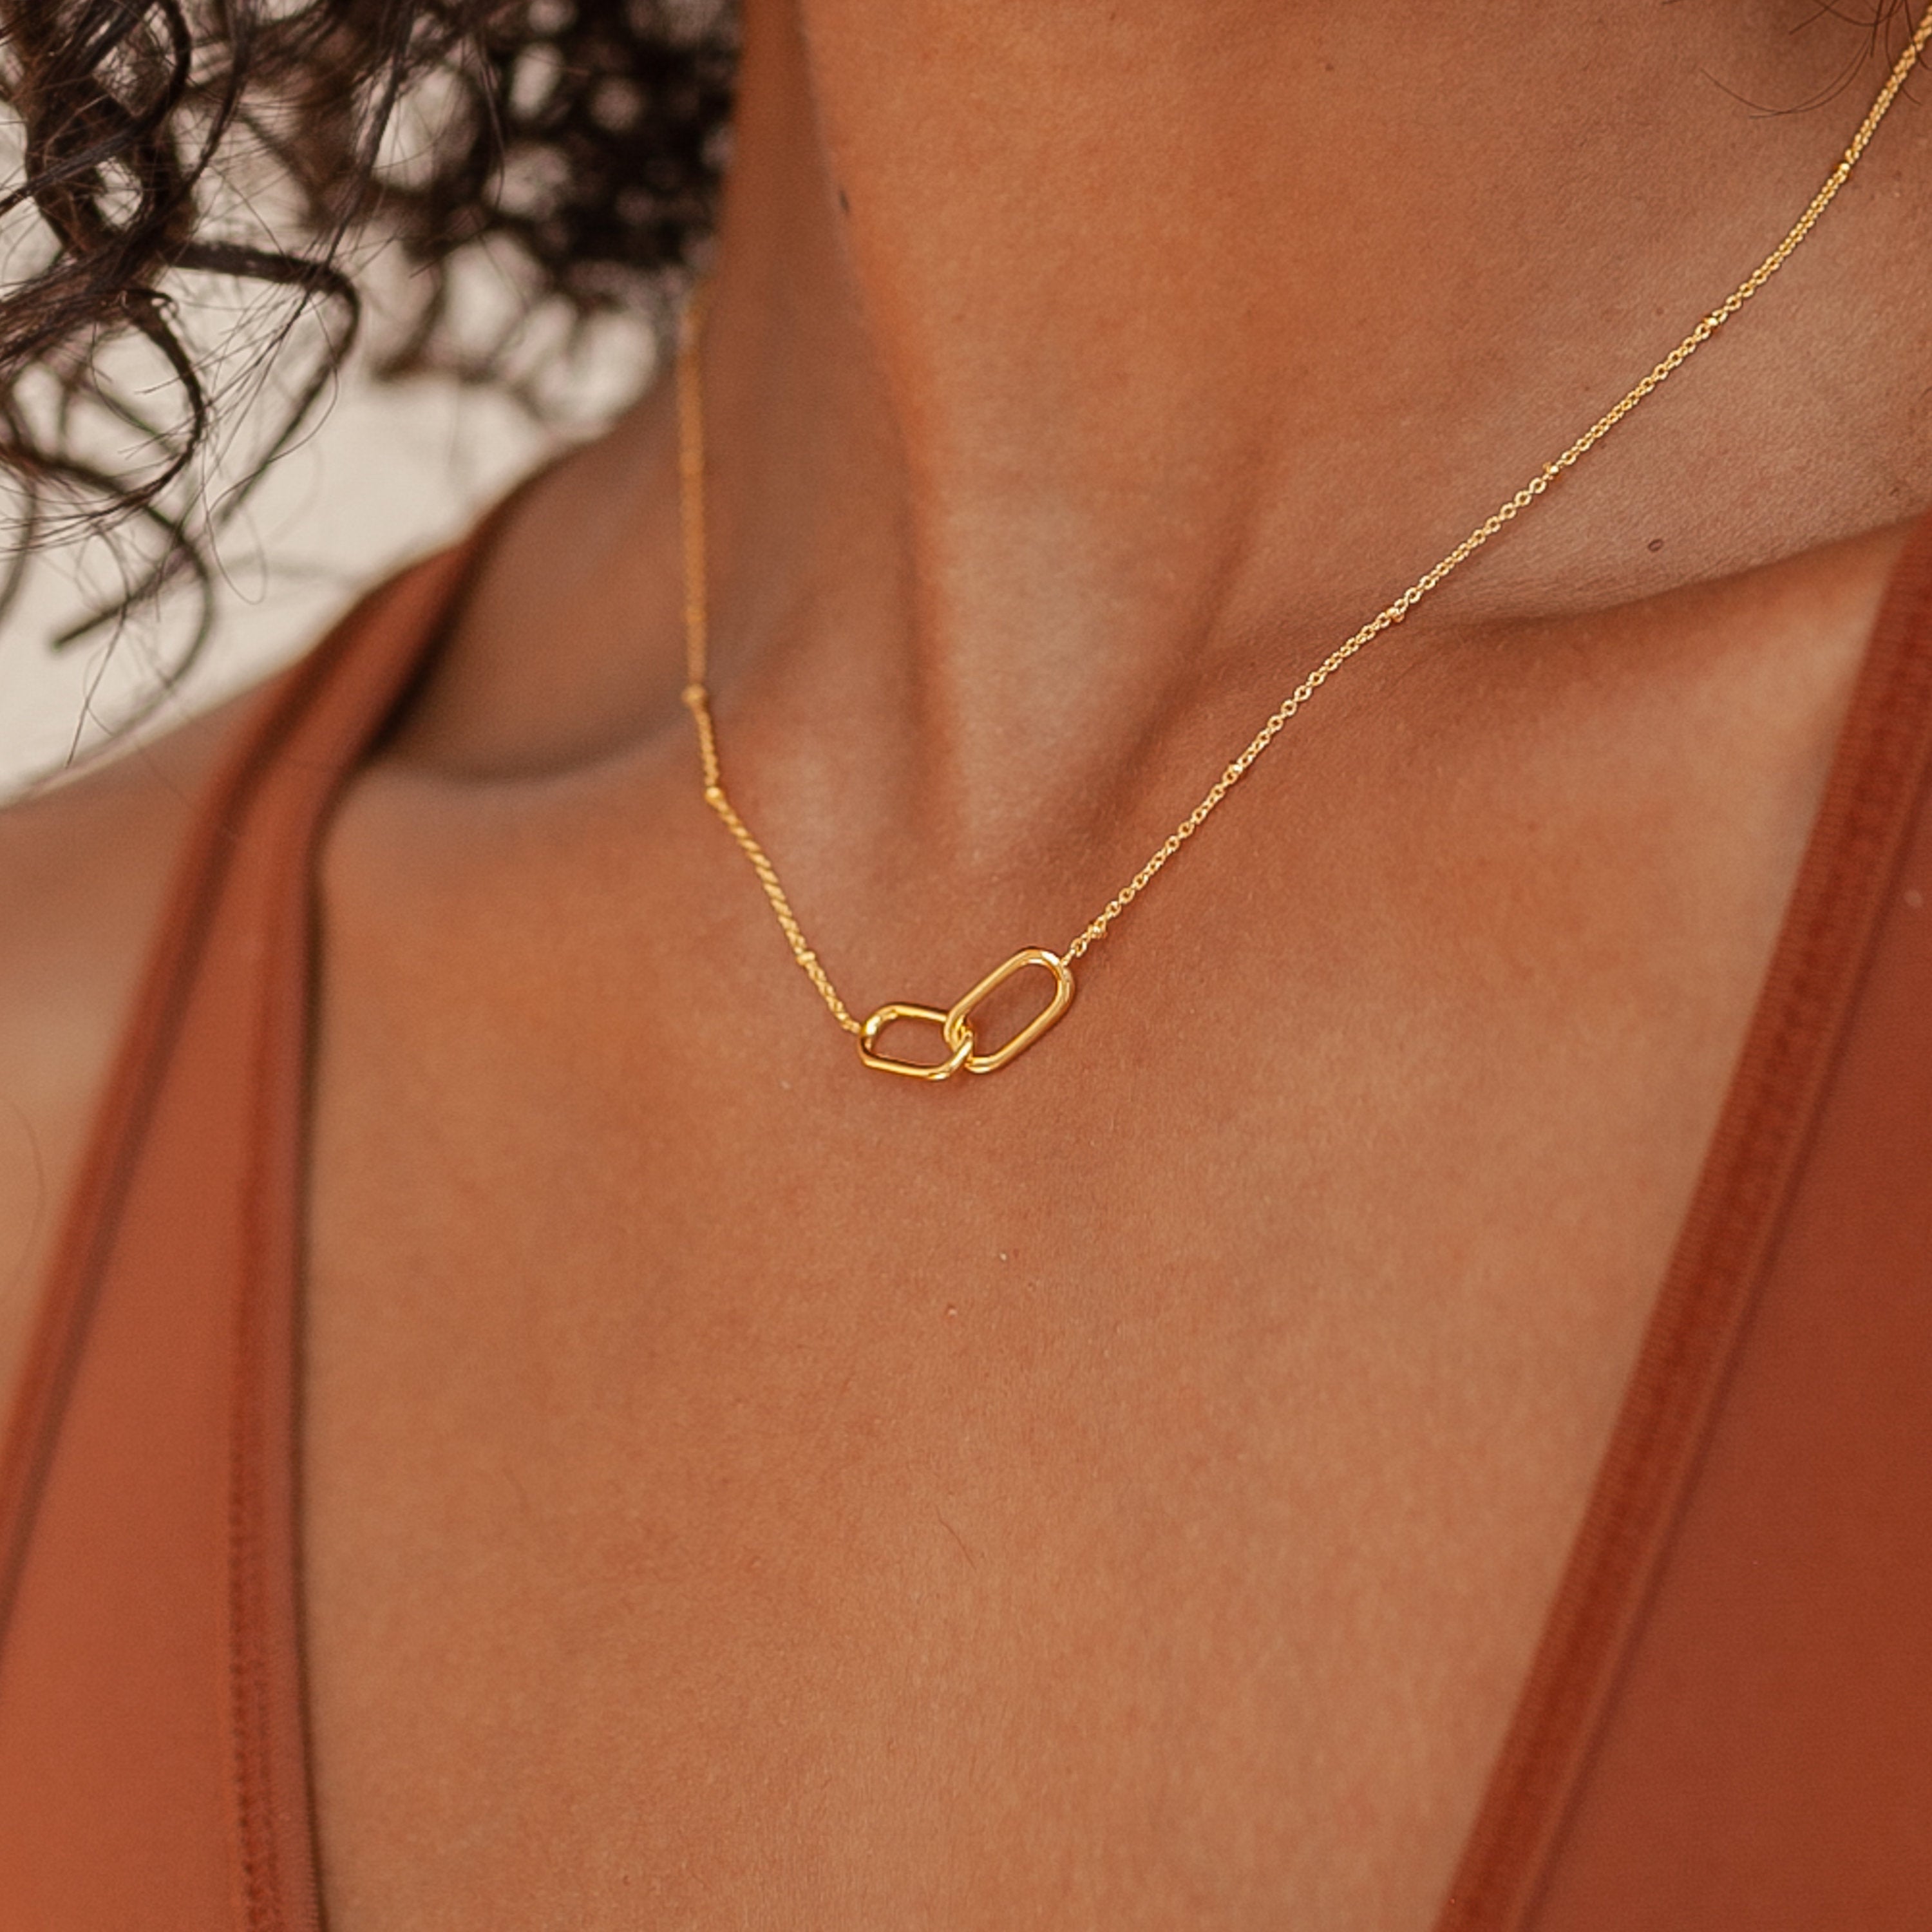 Linked Pendant Necklace